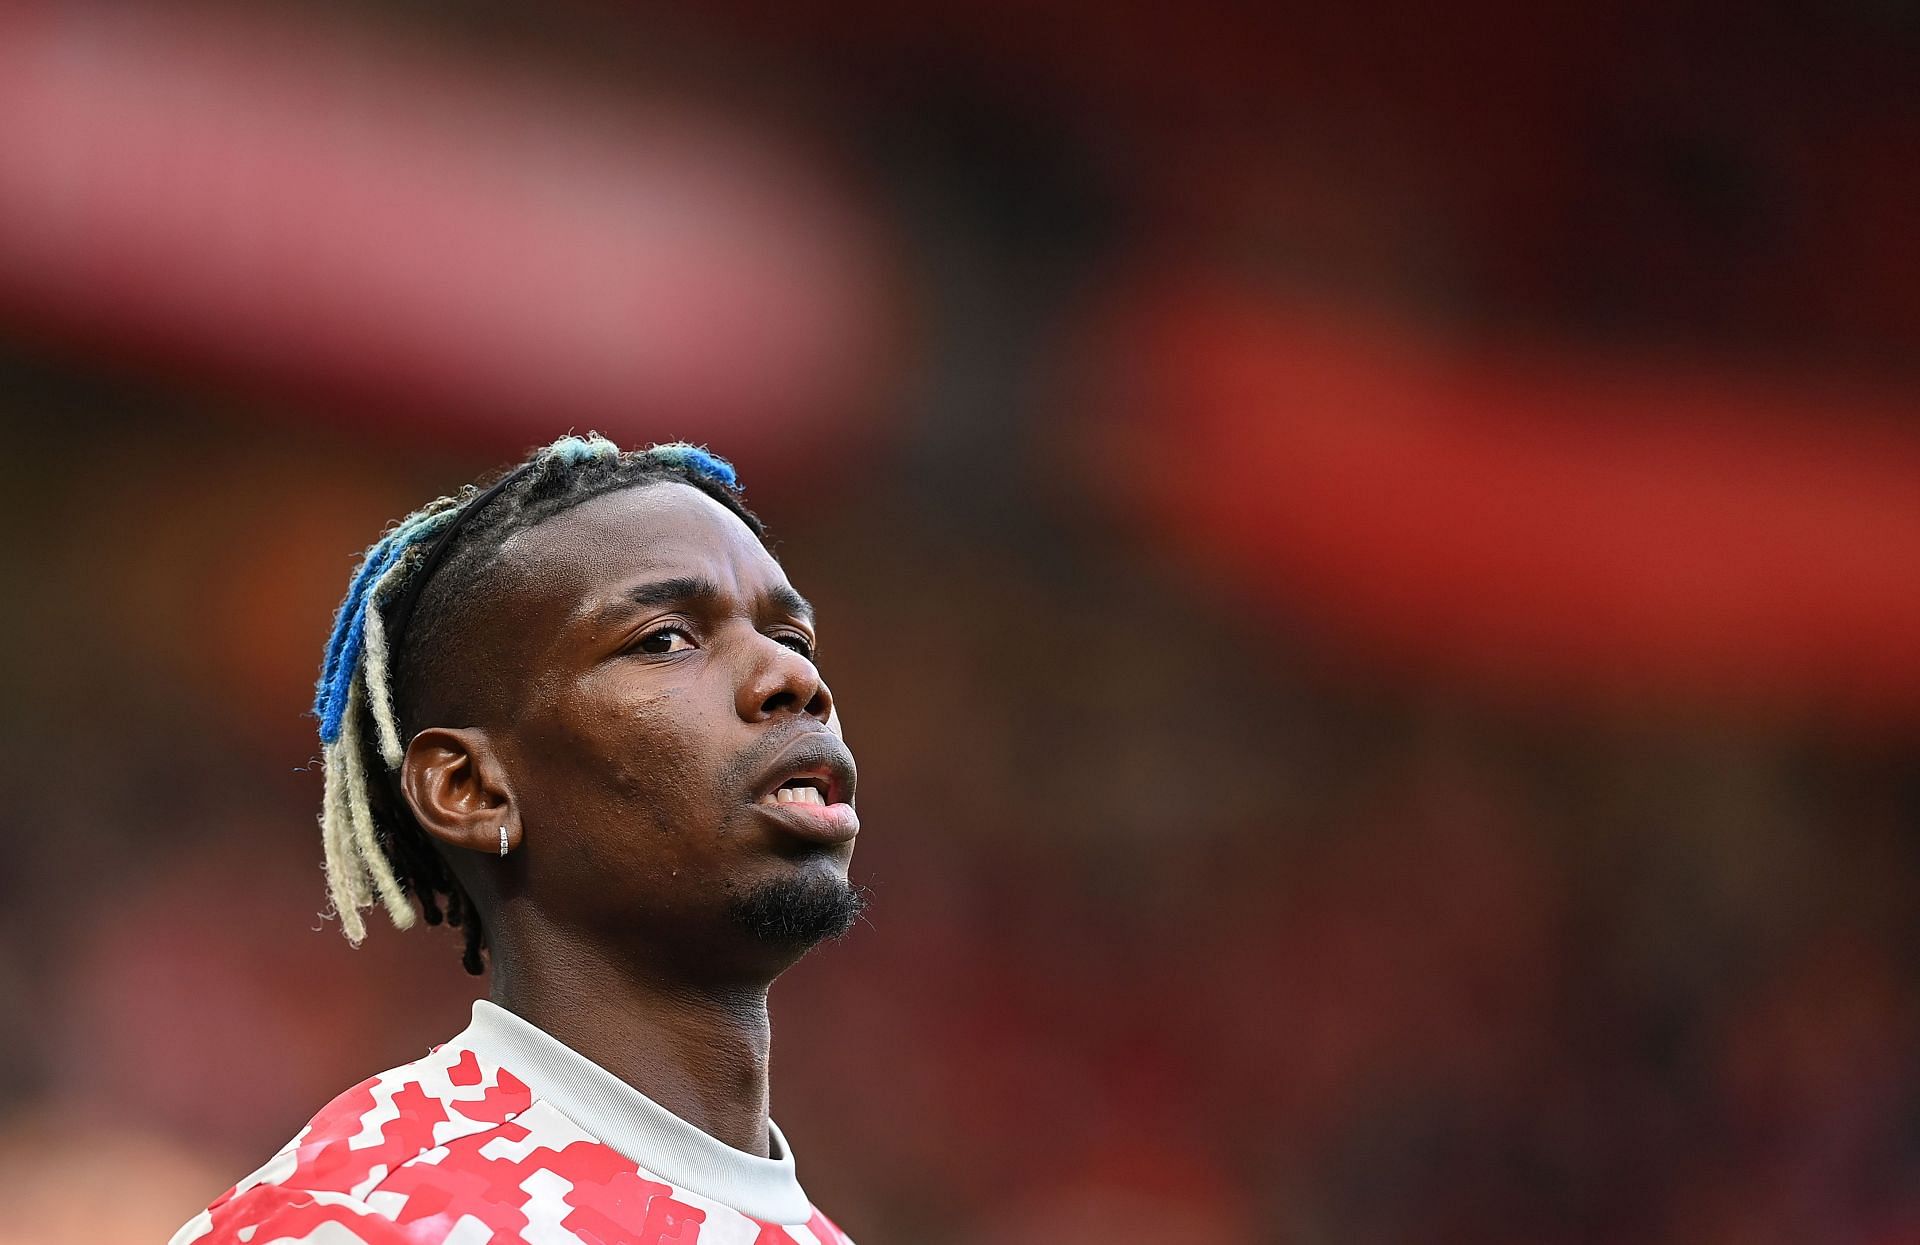 Paul Pogba was substituted early against Liverpool on Tuesday